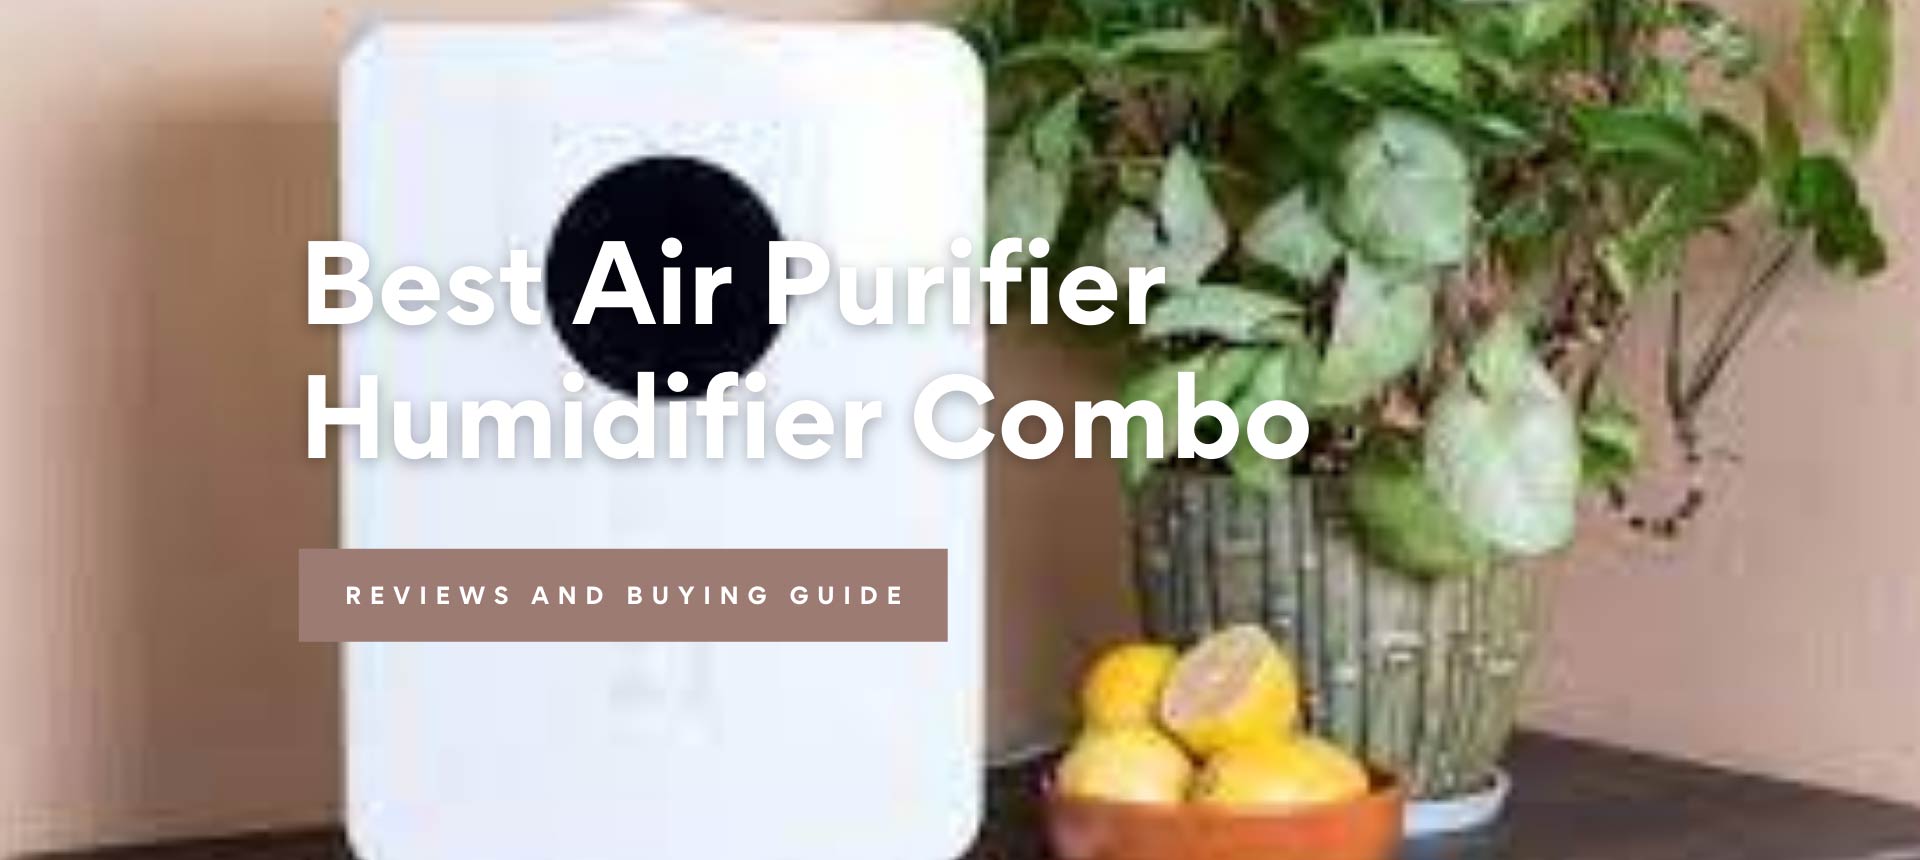 Best Air Purifier Humidifier Combo Review in 2021